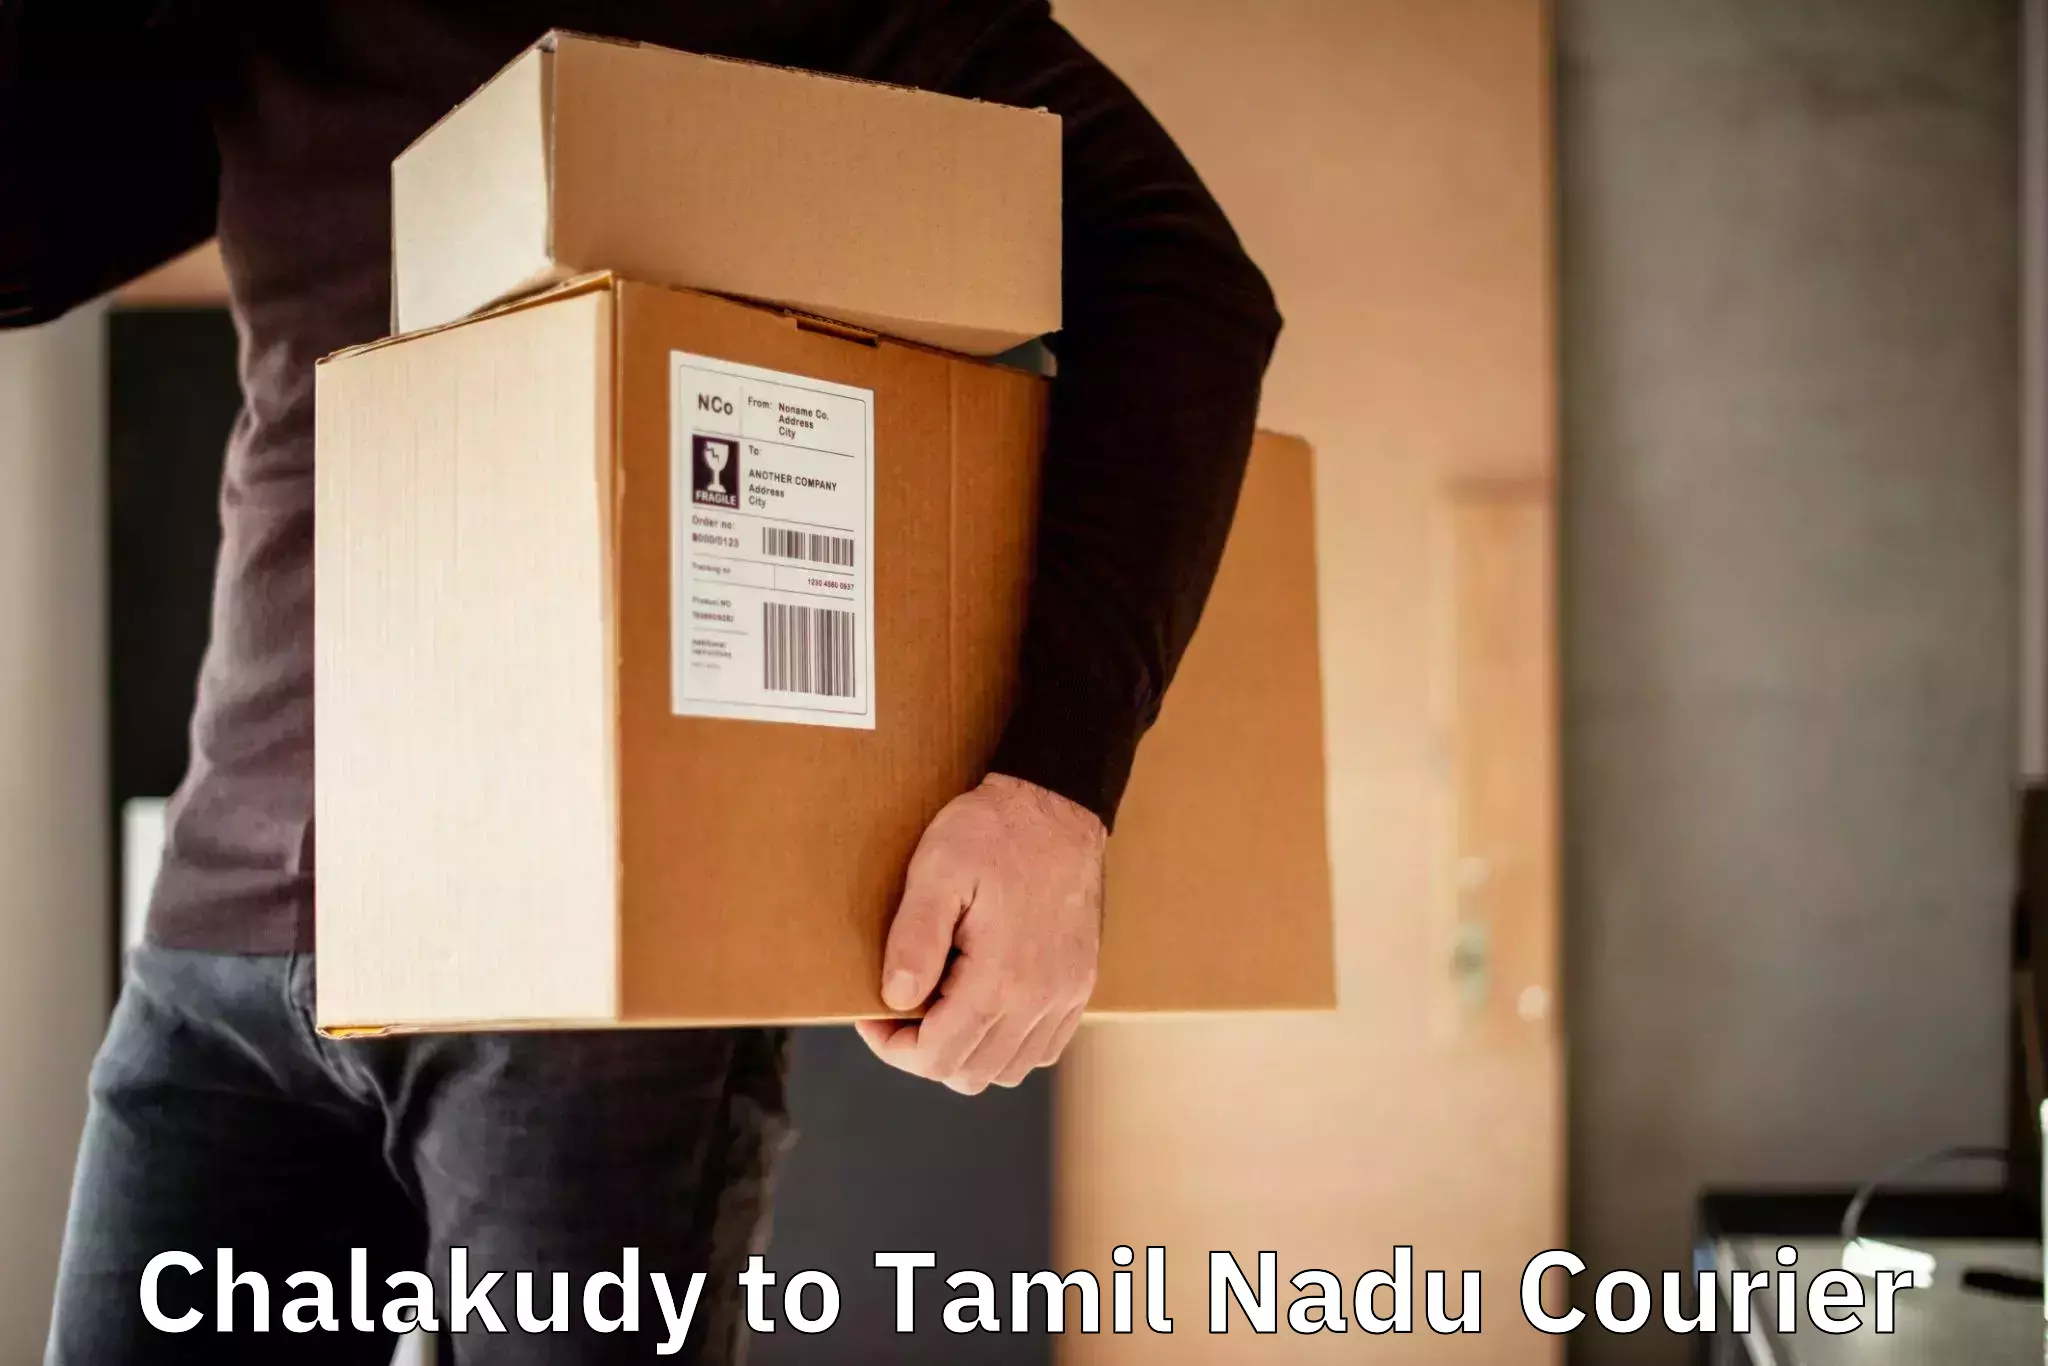 Personal courier services Chalakudy to Kulittalai